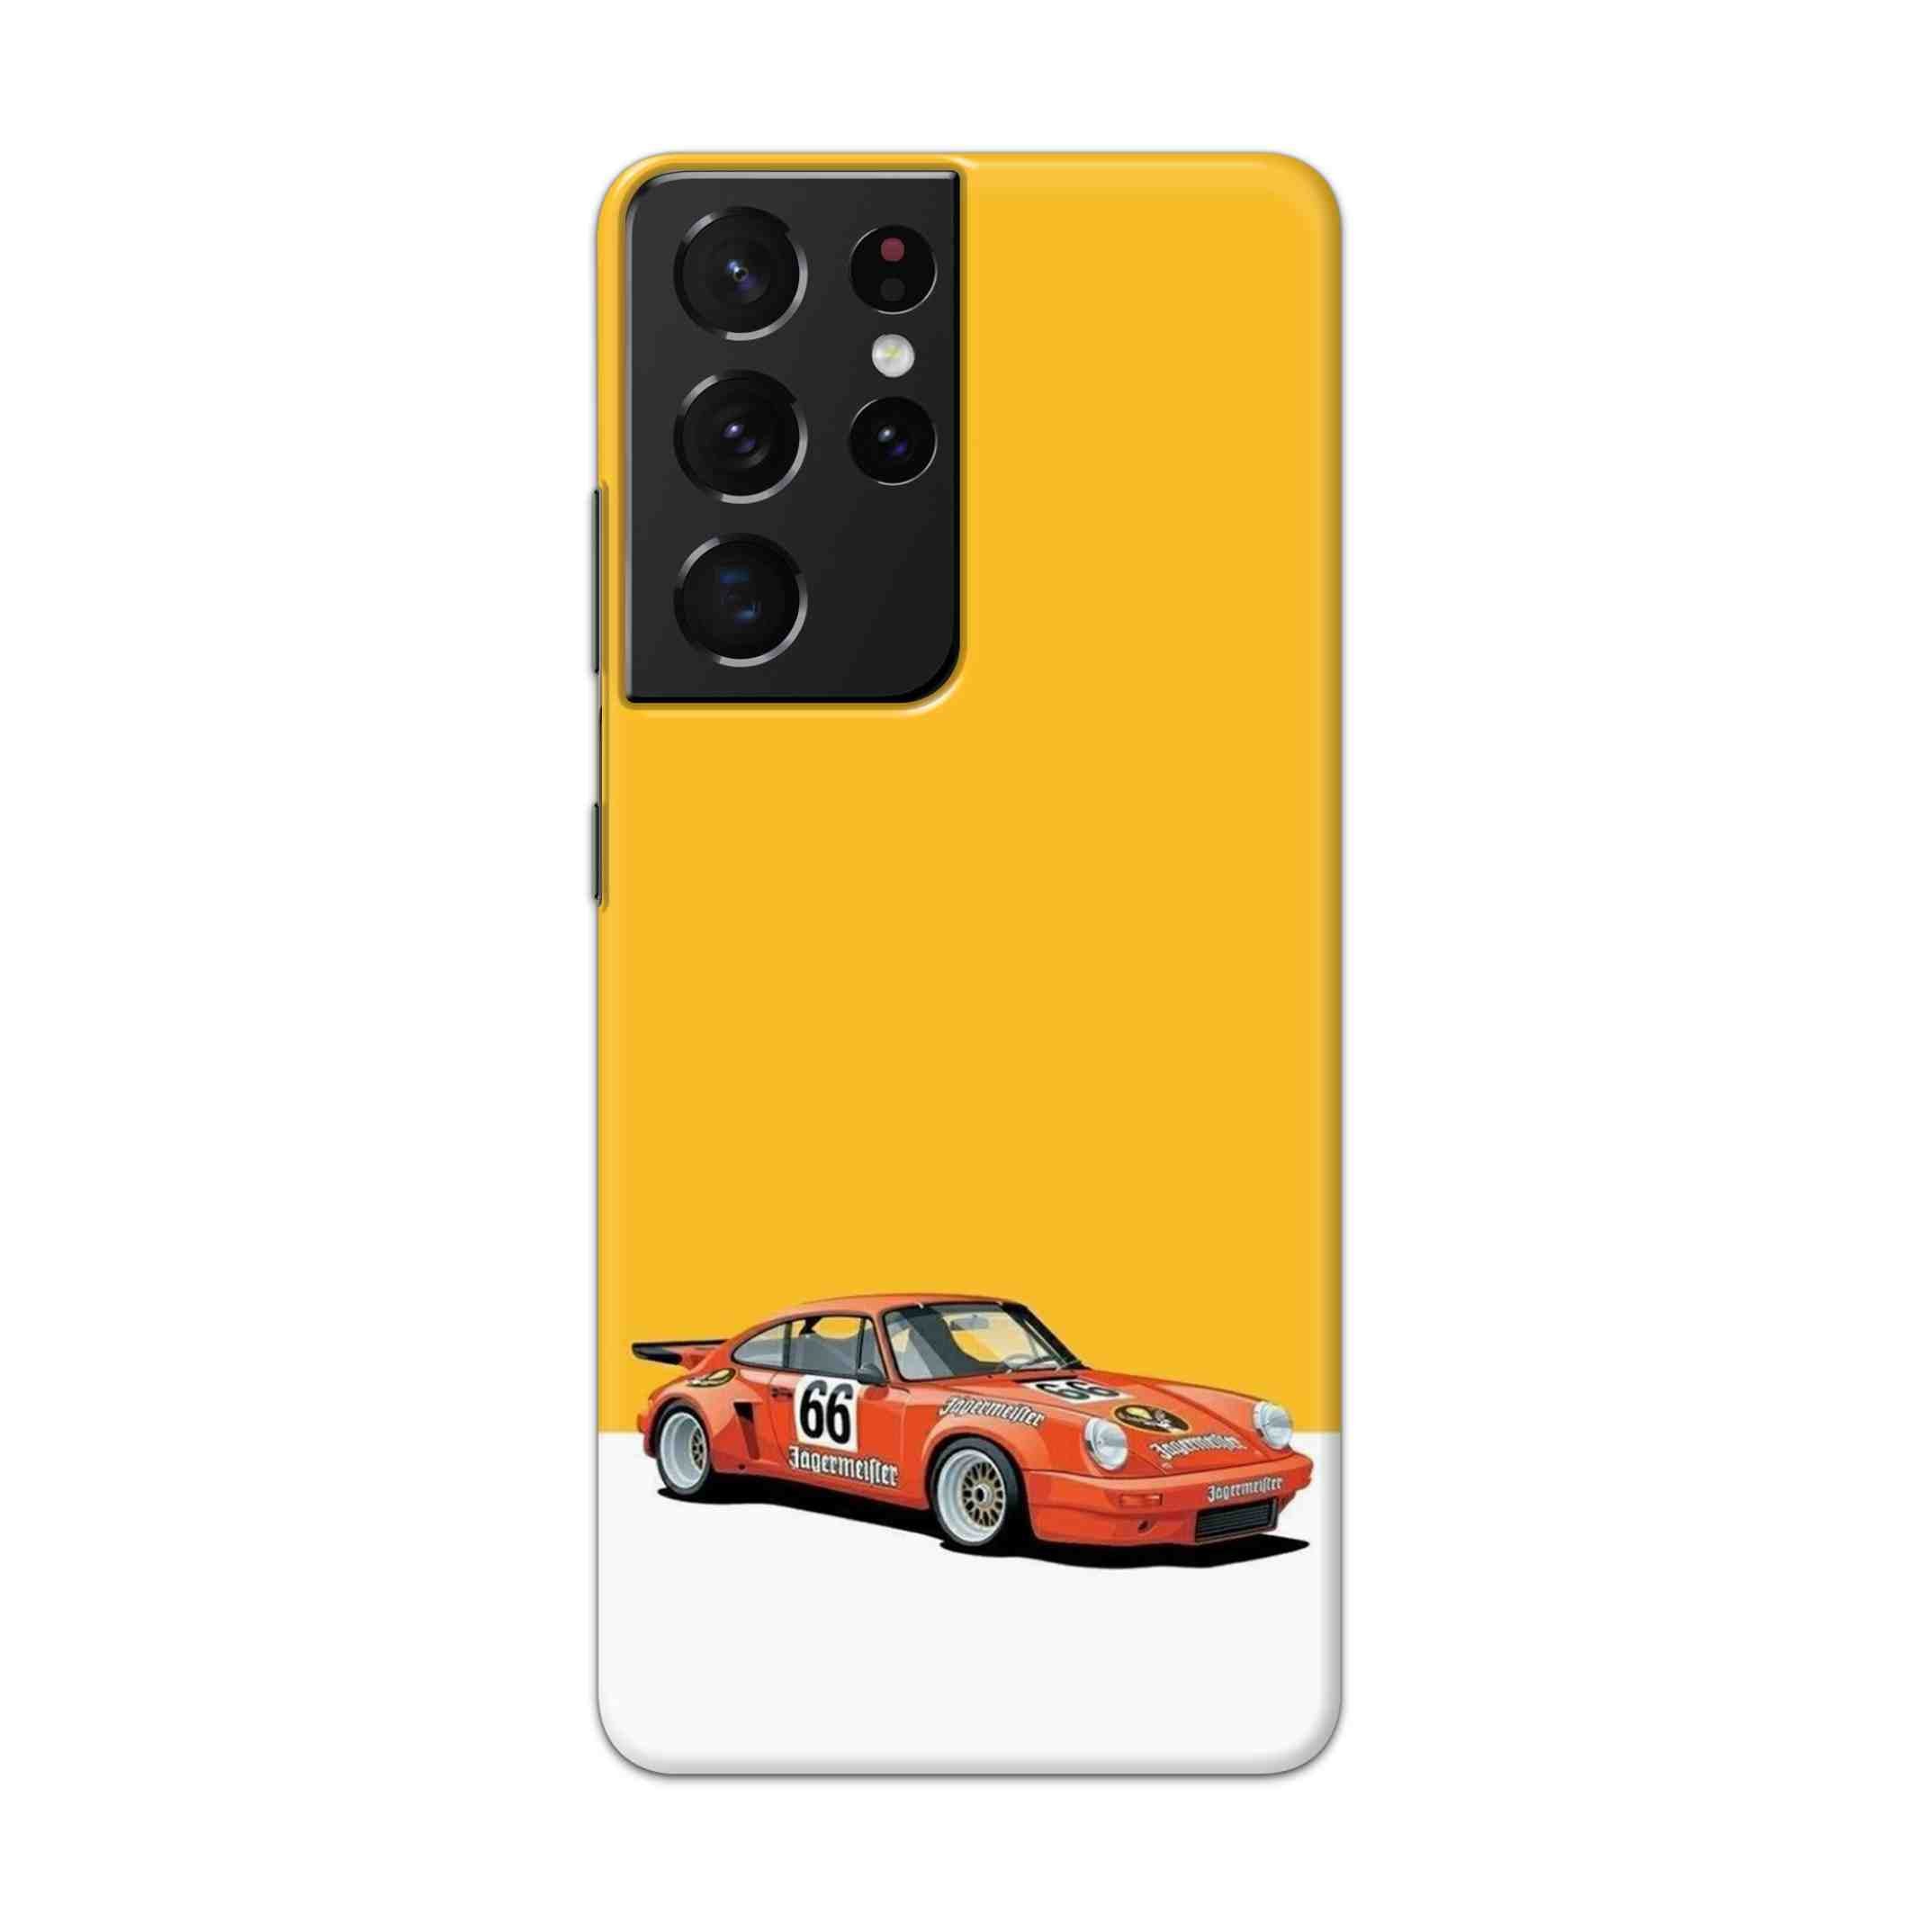 Buy Porche Hard Back Mobile Phone Case Cover For Samsung Galaxy S21 Ultra Online